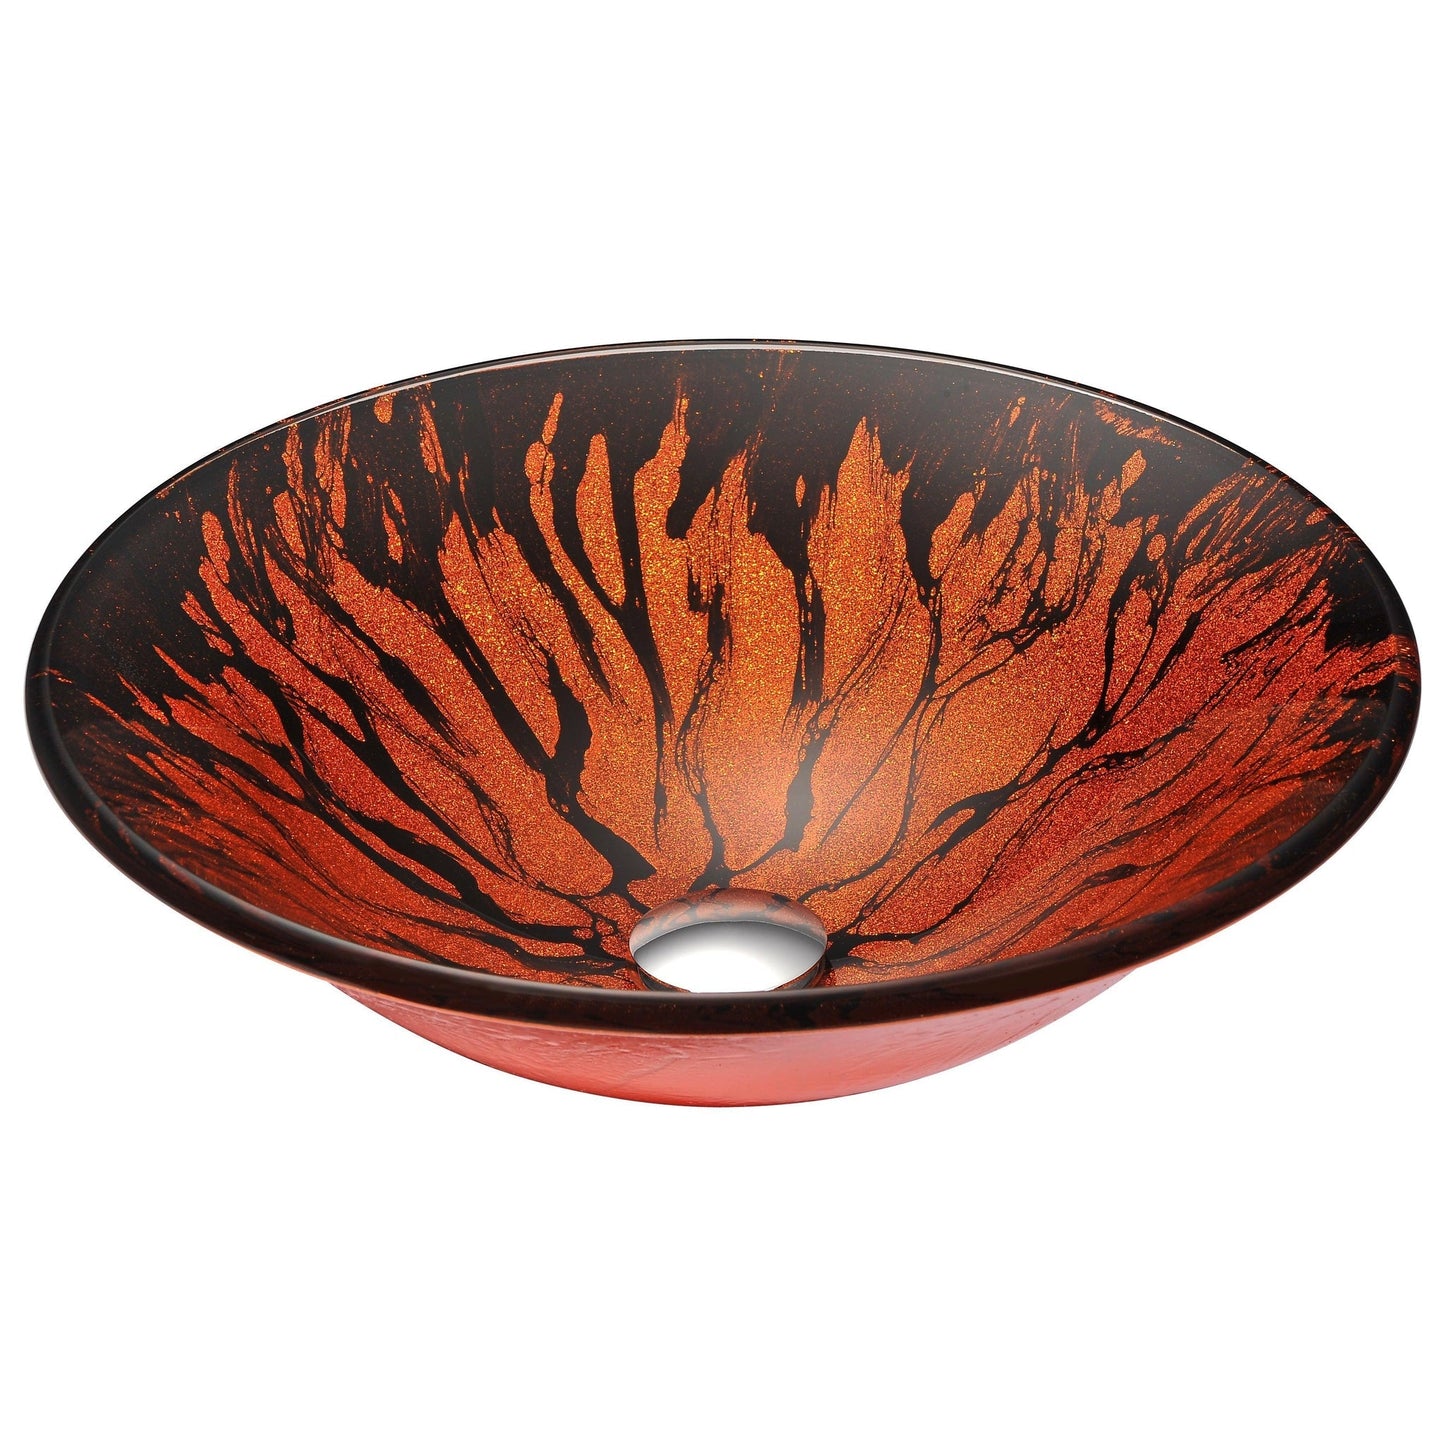 ANZZI Ore Series 18" x 18" Round Lustrous Red and Black Deco-Glass Vessel Sink With Polished Chrome Pop-Up Drain